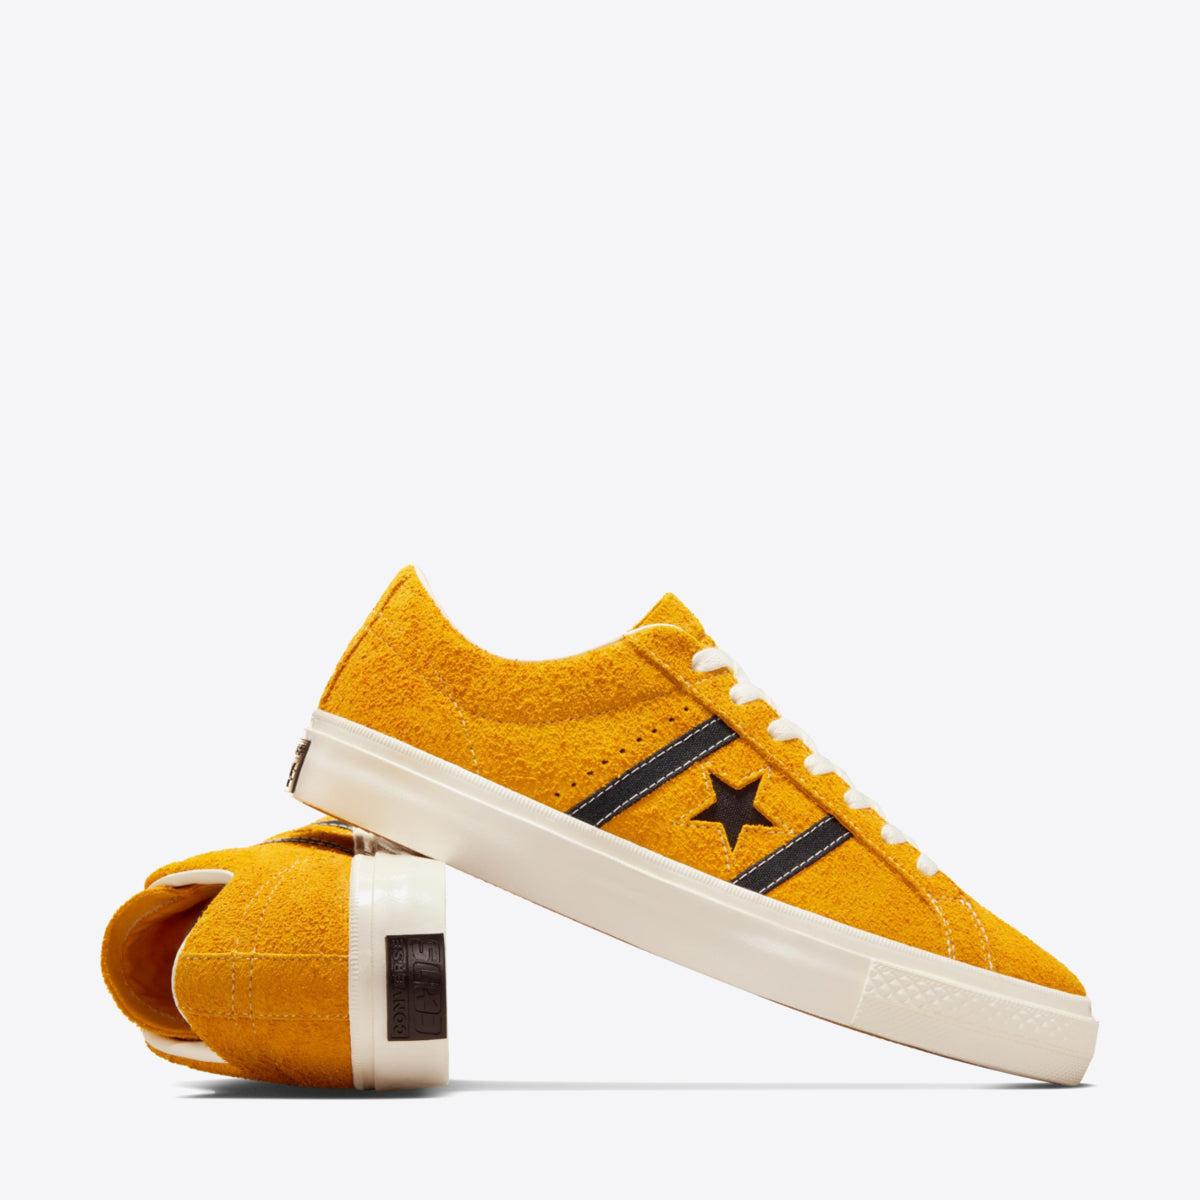 CONVERSE One Star Academy Pro Low Sunflower Gold/Black - Image 7